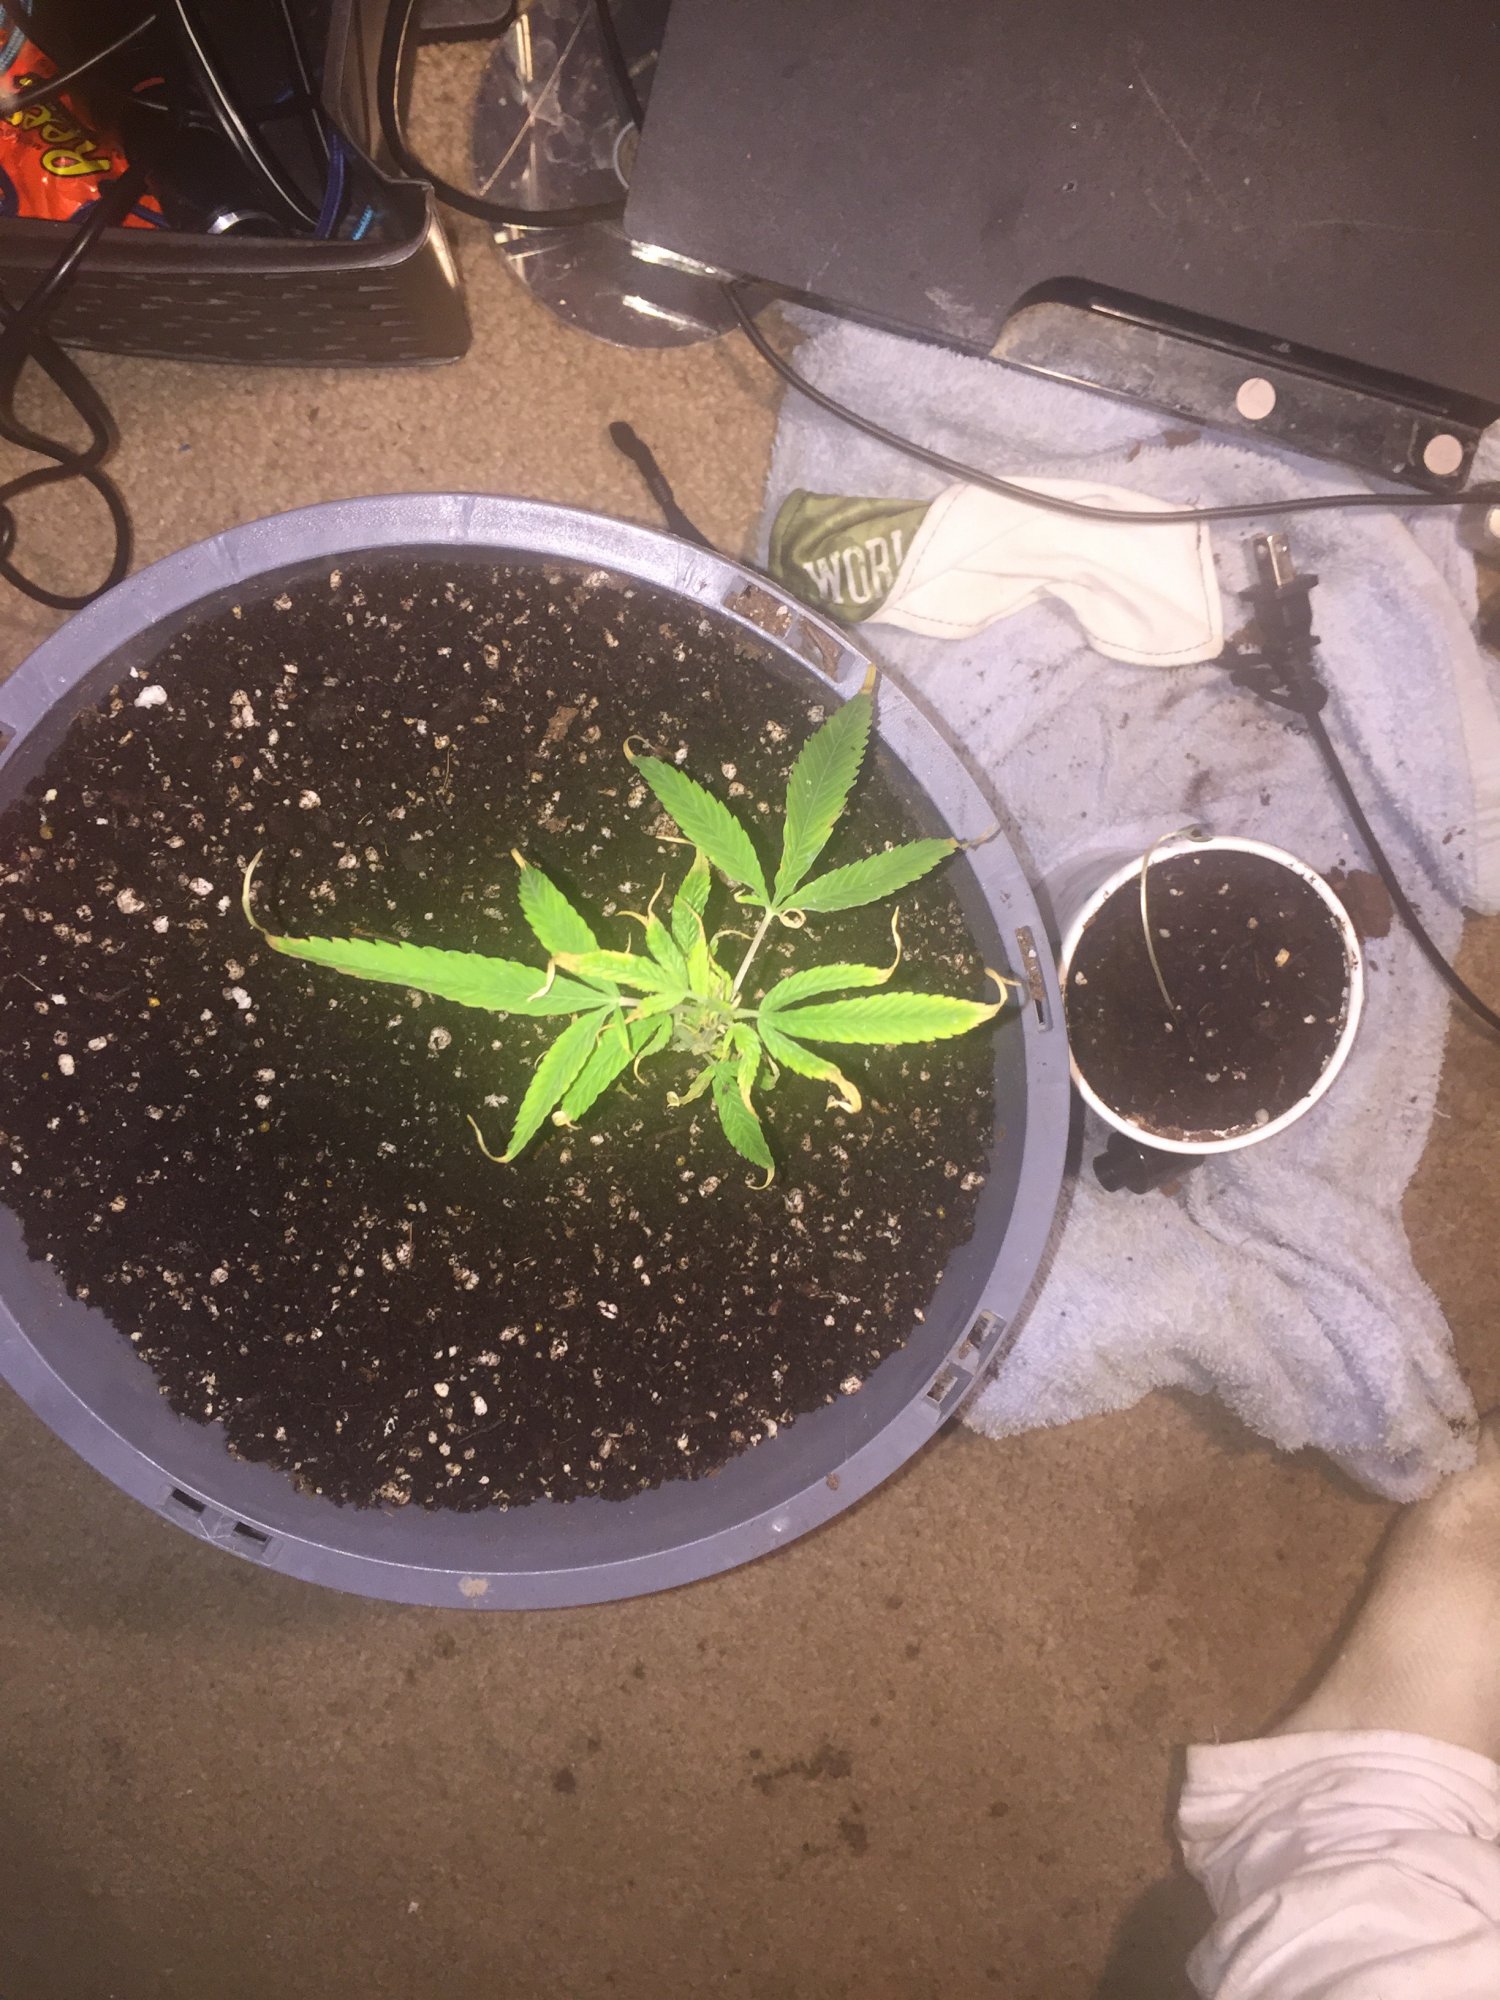 Update on my clones that i still need help with